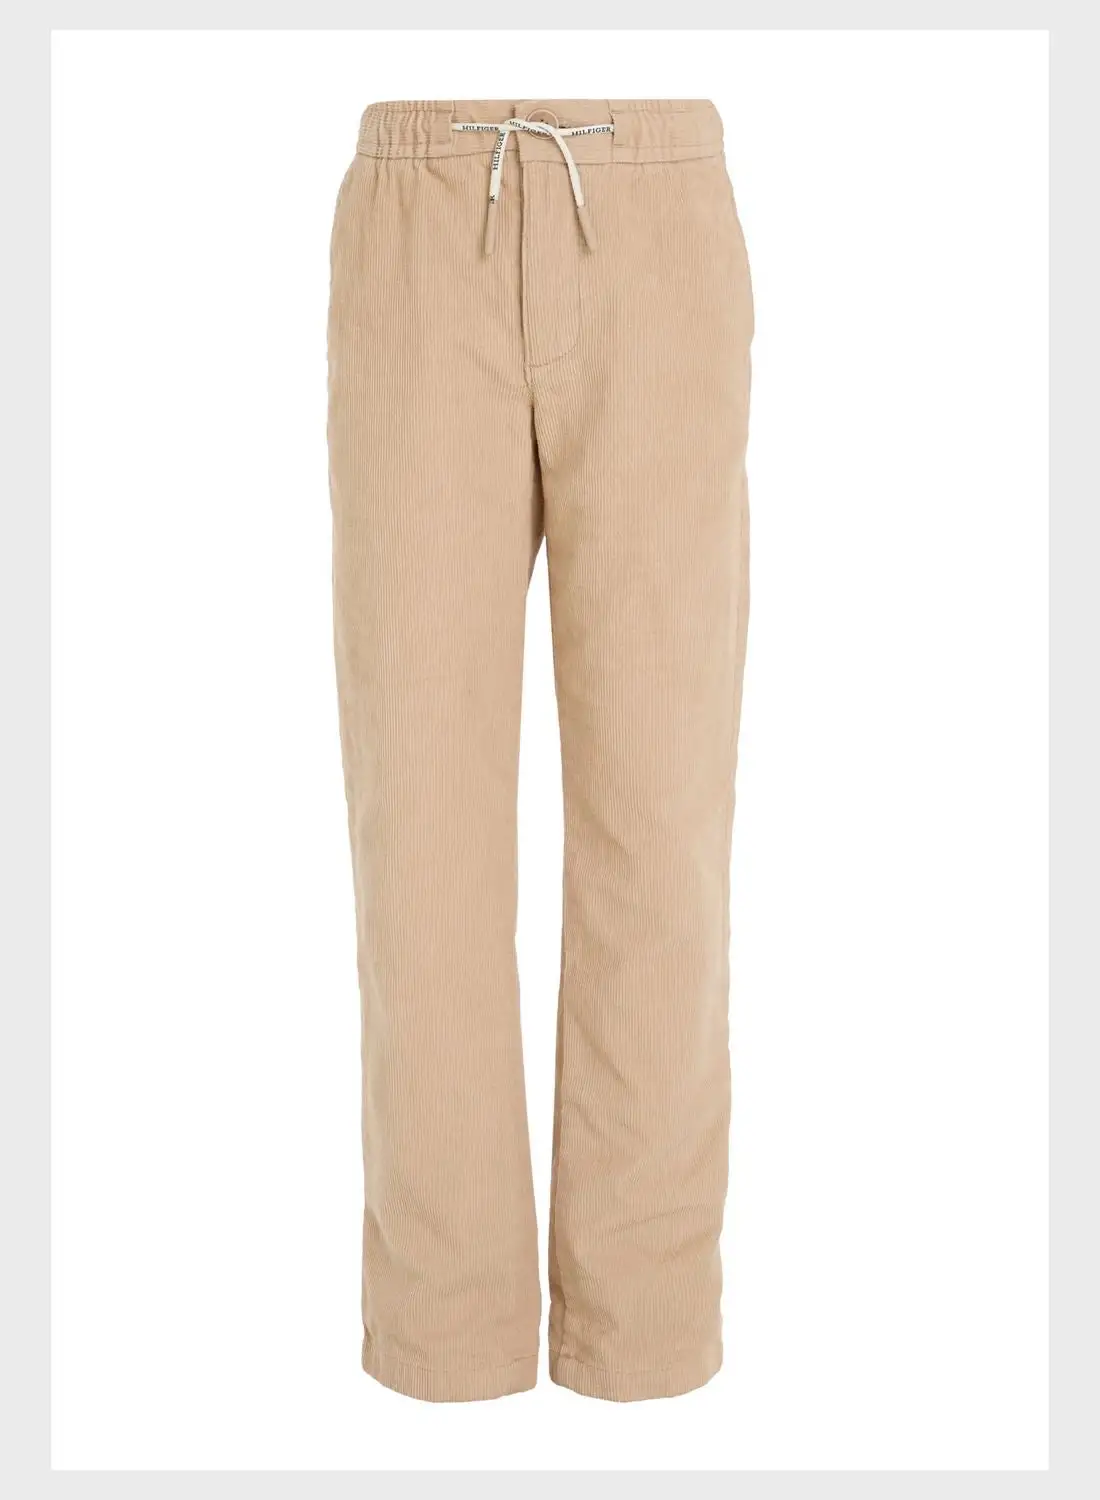 TOMMY HILFIGER Youth Corduroy Pants